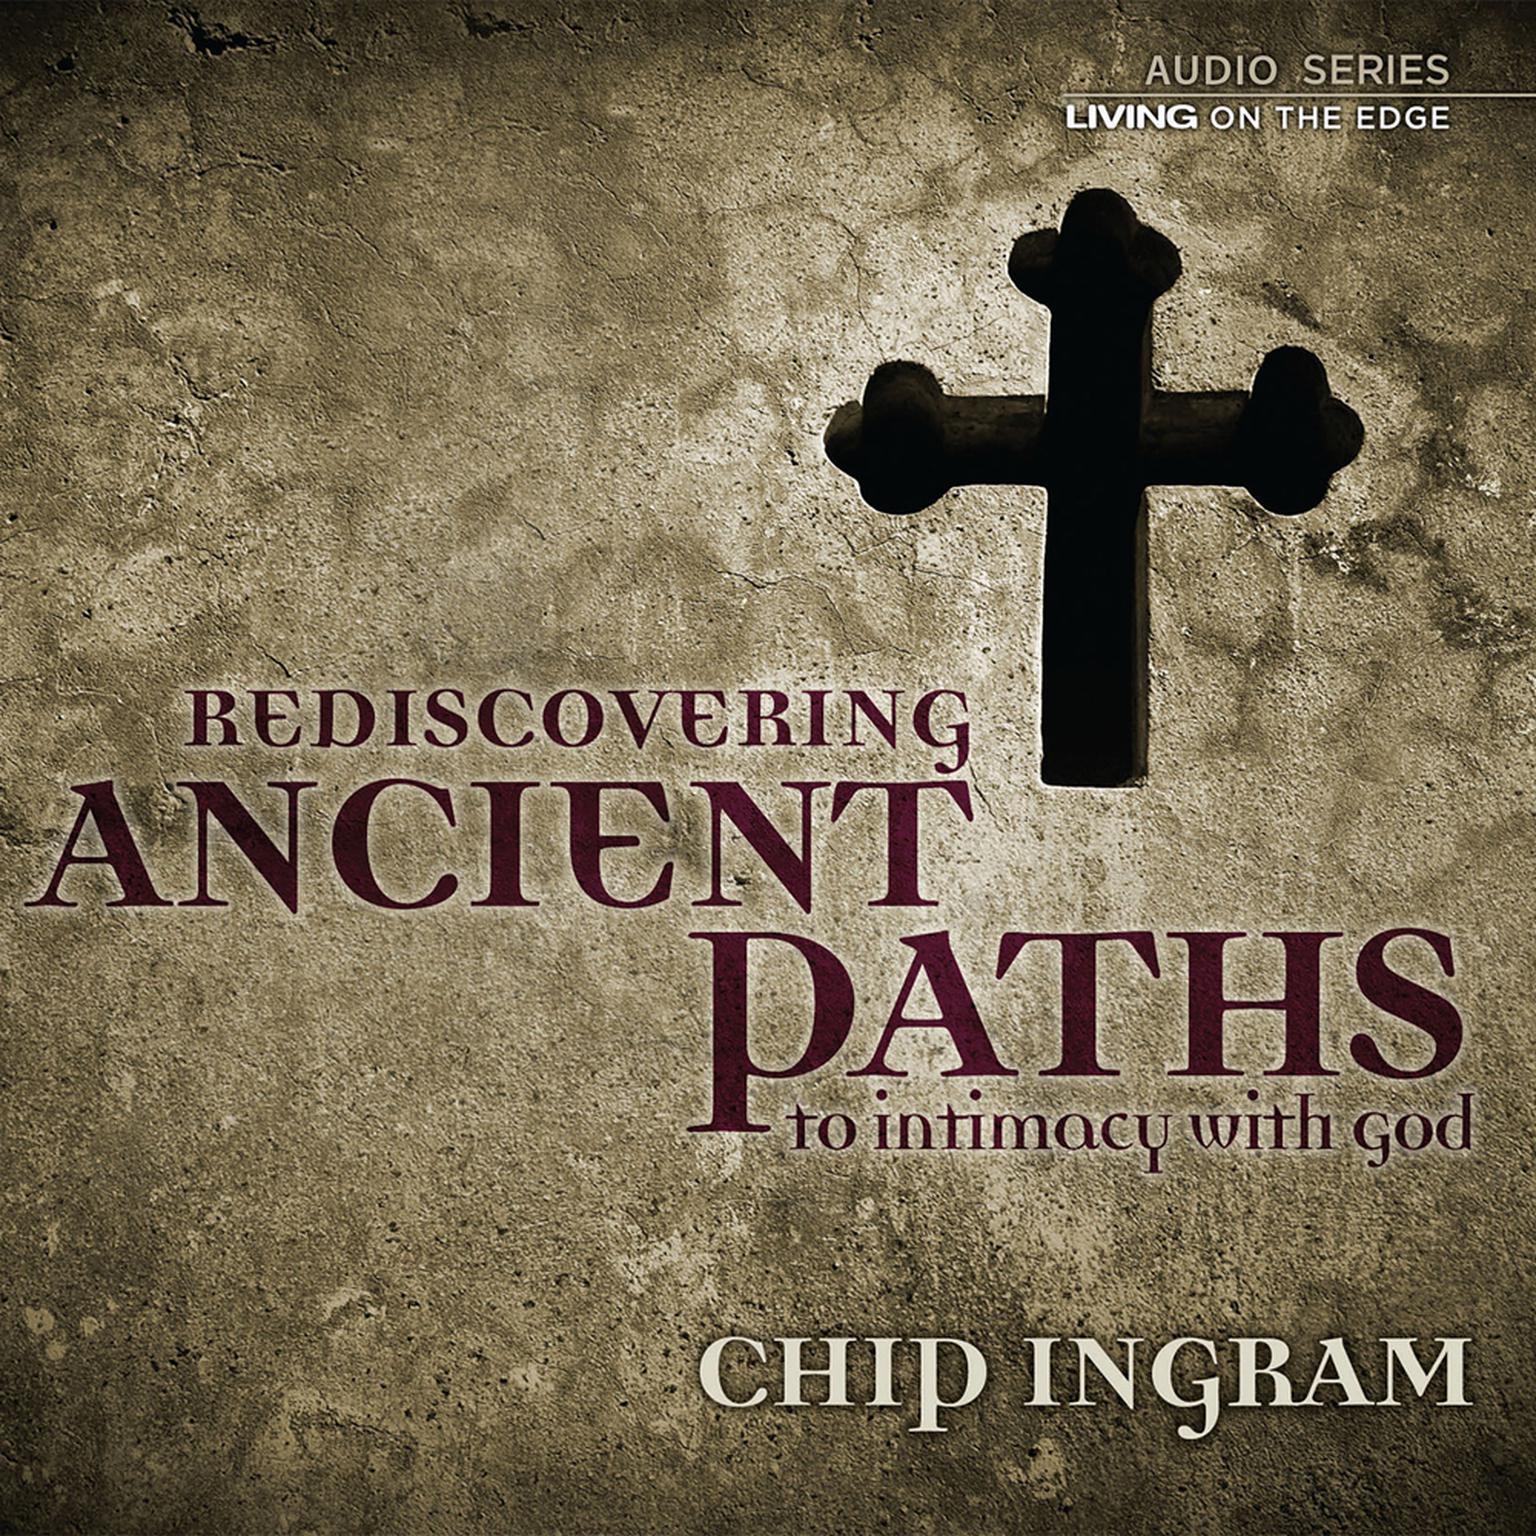 Ancient Paths to Intimacy with God Teaching Series Audiobook, by Chip Ingram